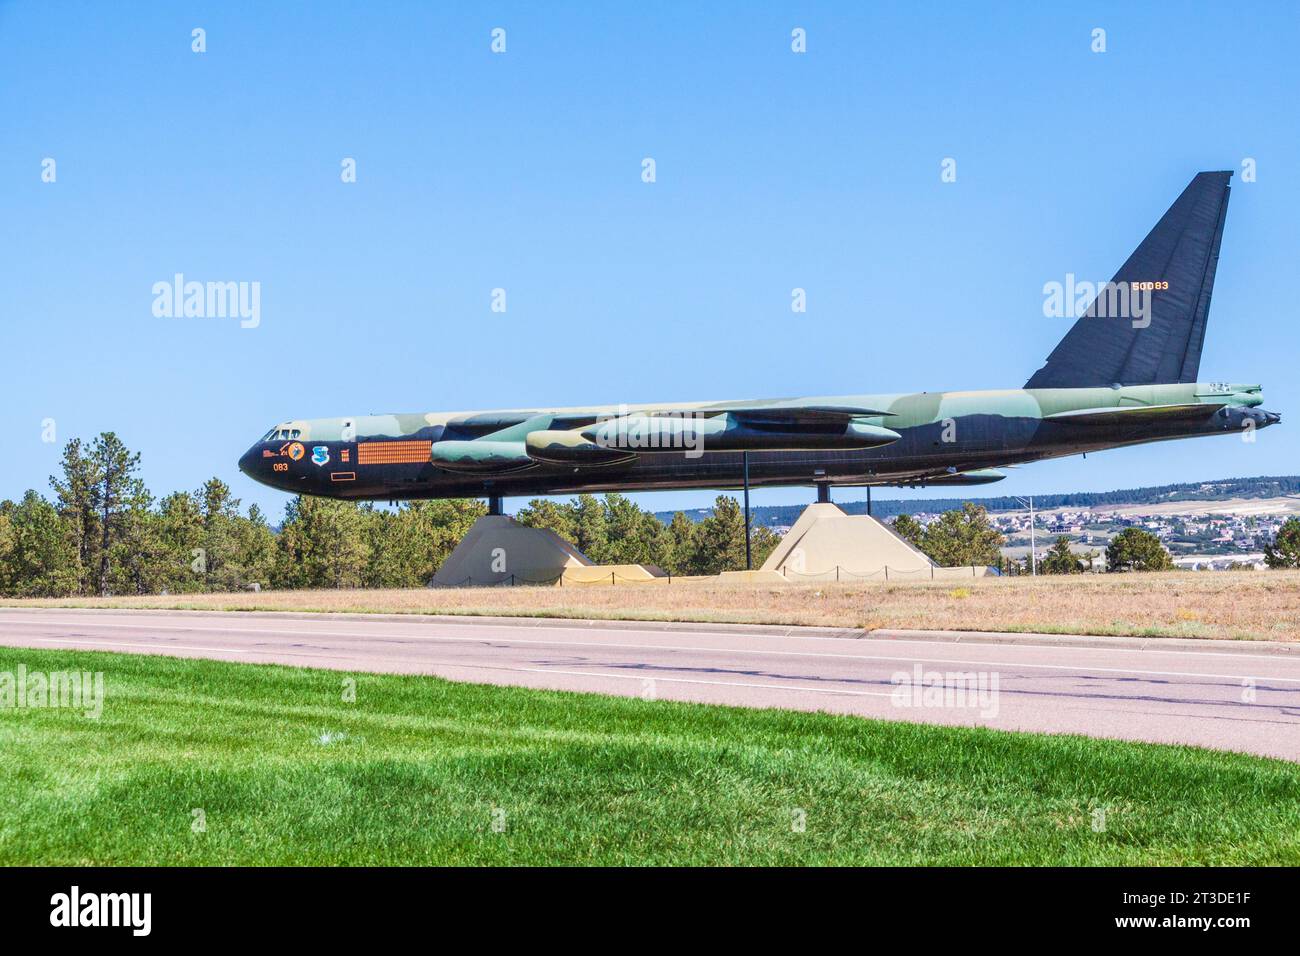 B-52 bomber airplane on display at United States Air Force Academy in Colorado Springs, Colorado. Stock Photo